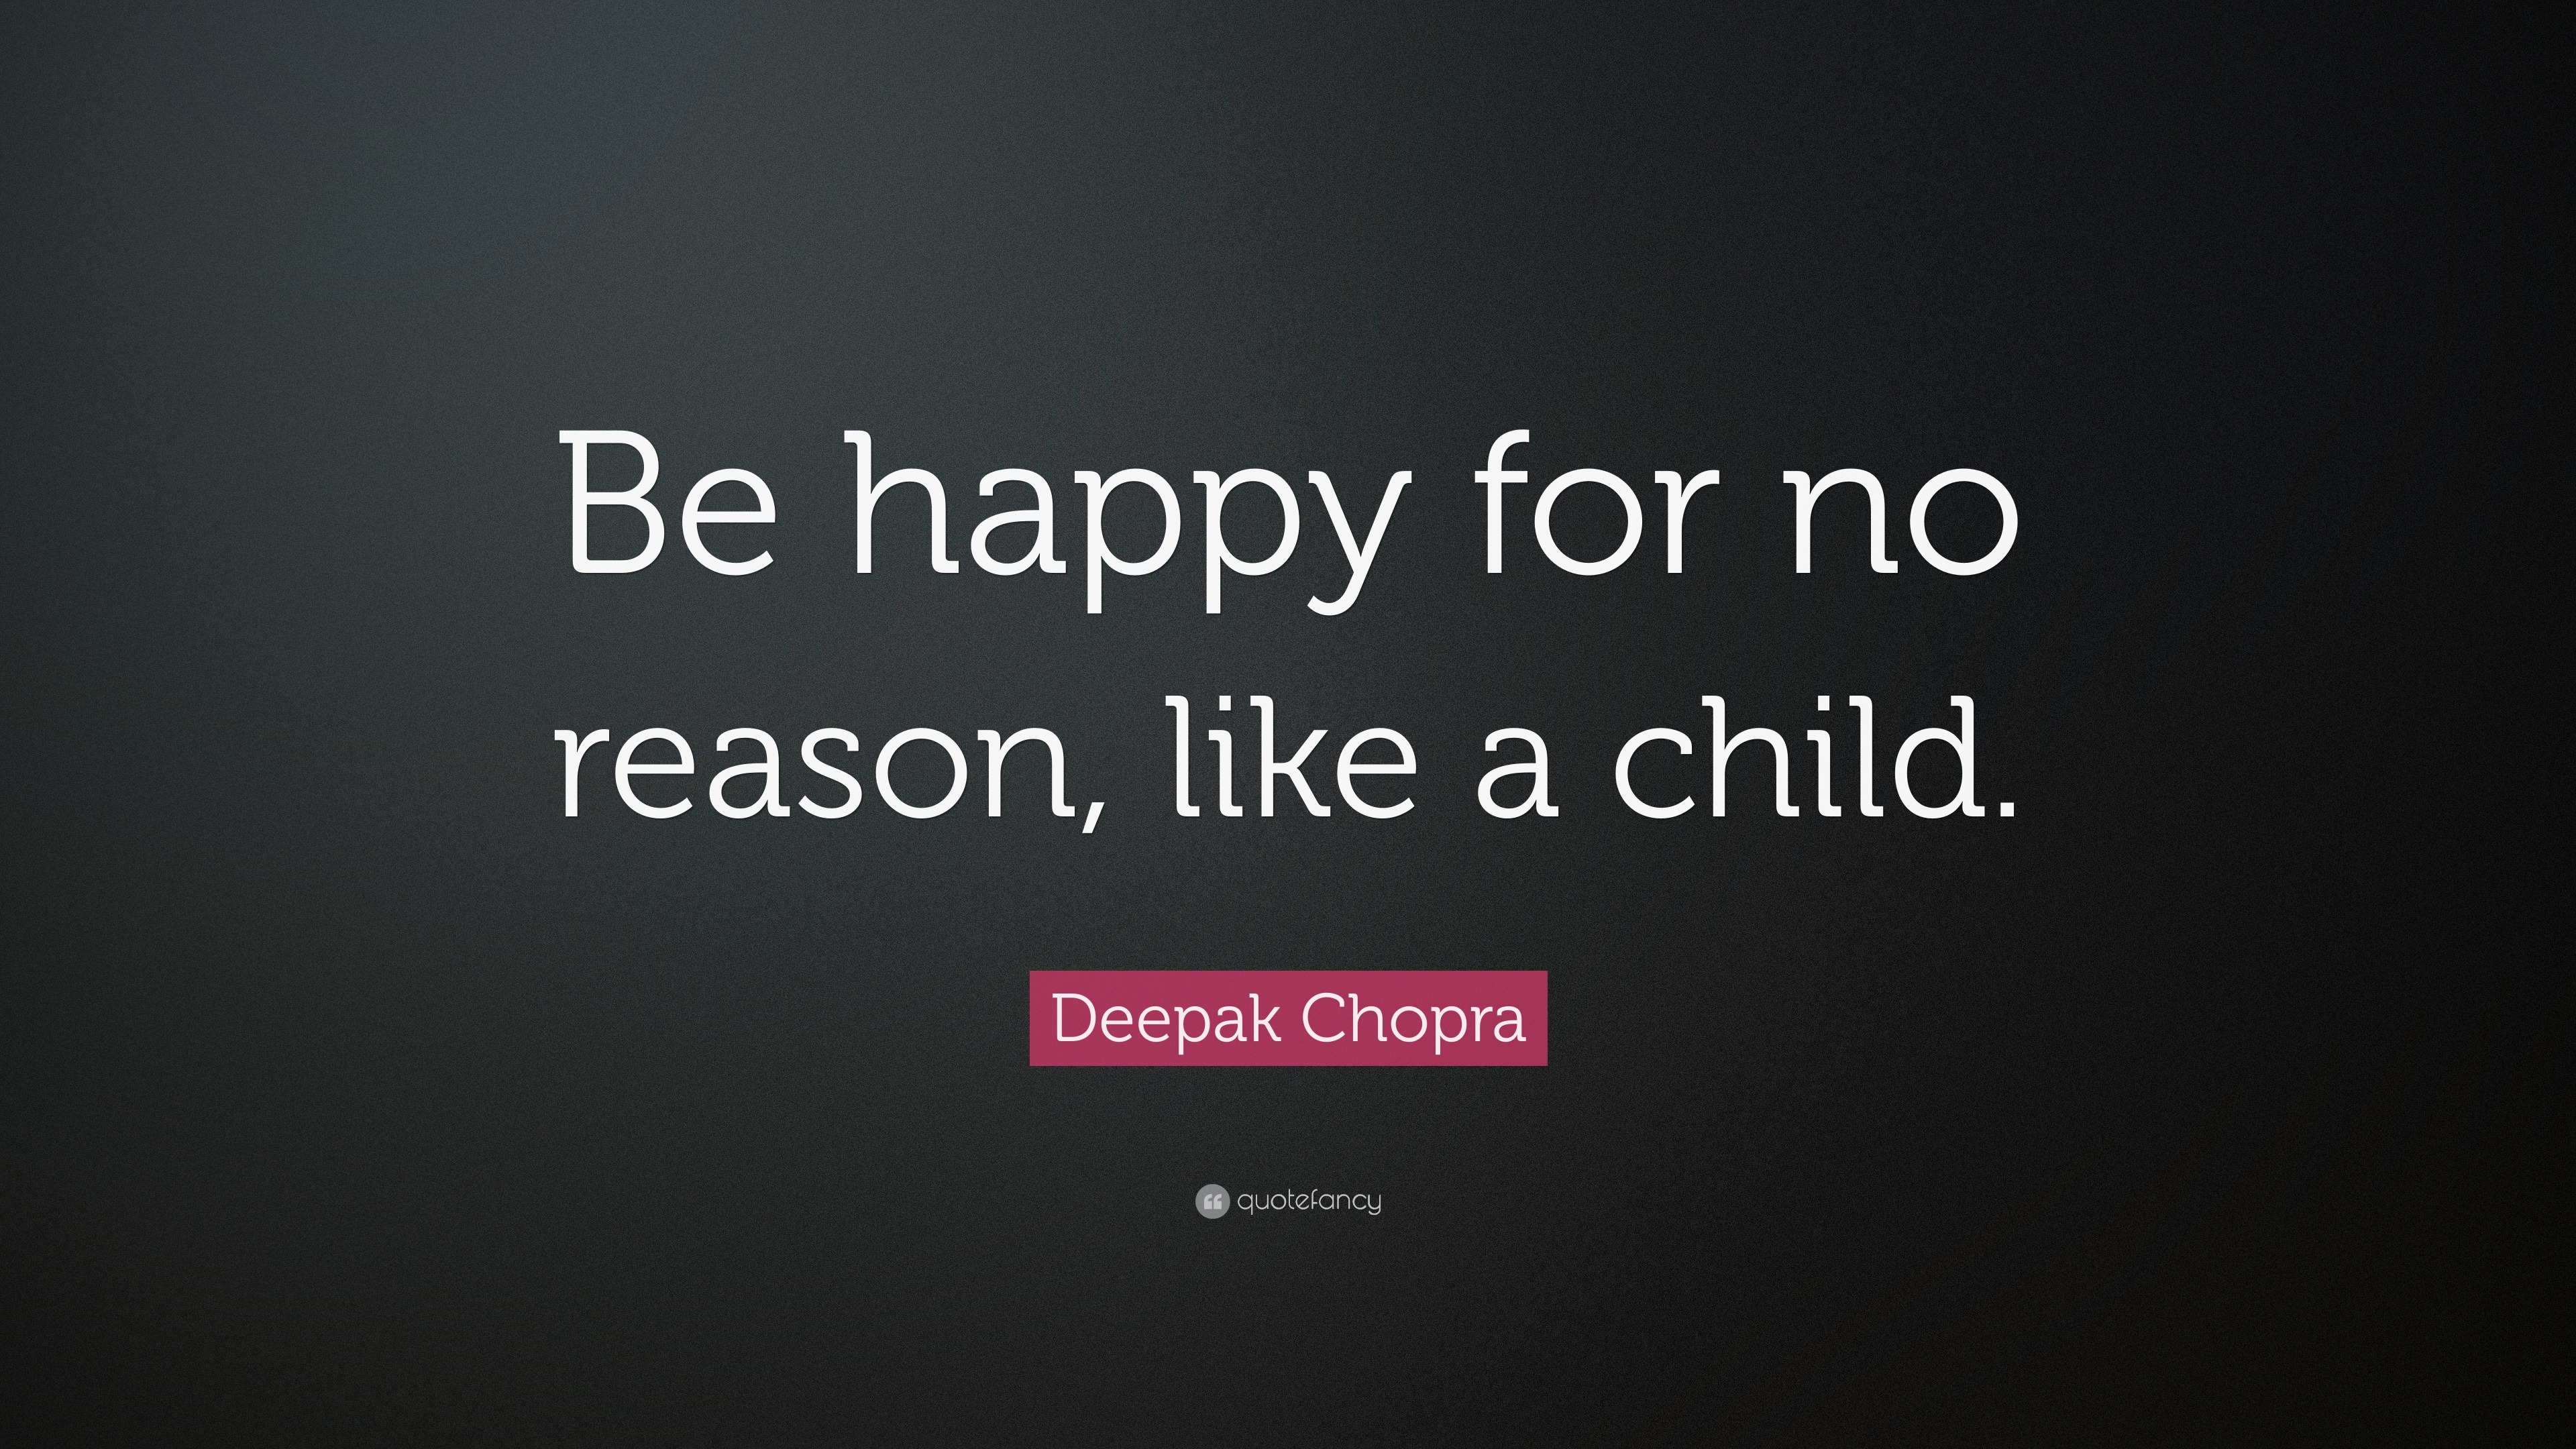 Deepak Chopra Quote: “Be happy for no reason, like a child.”